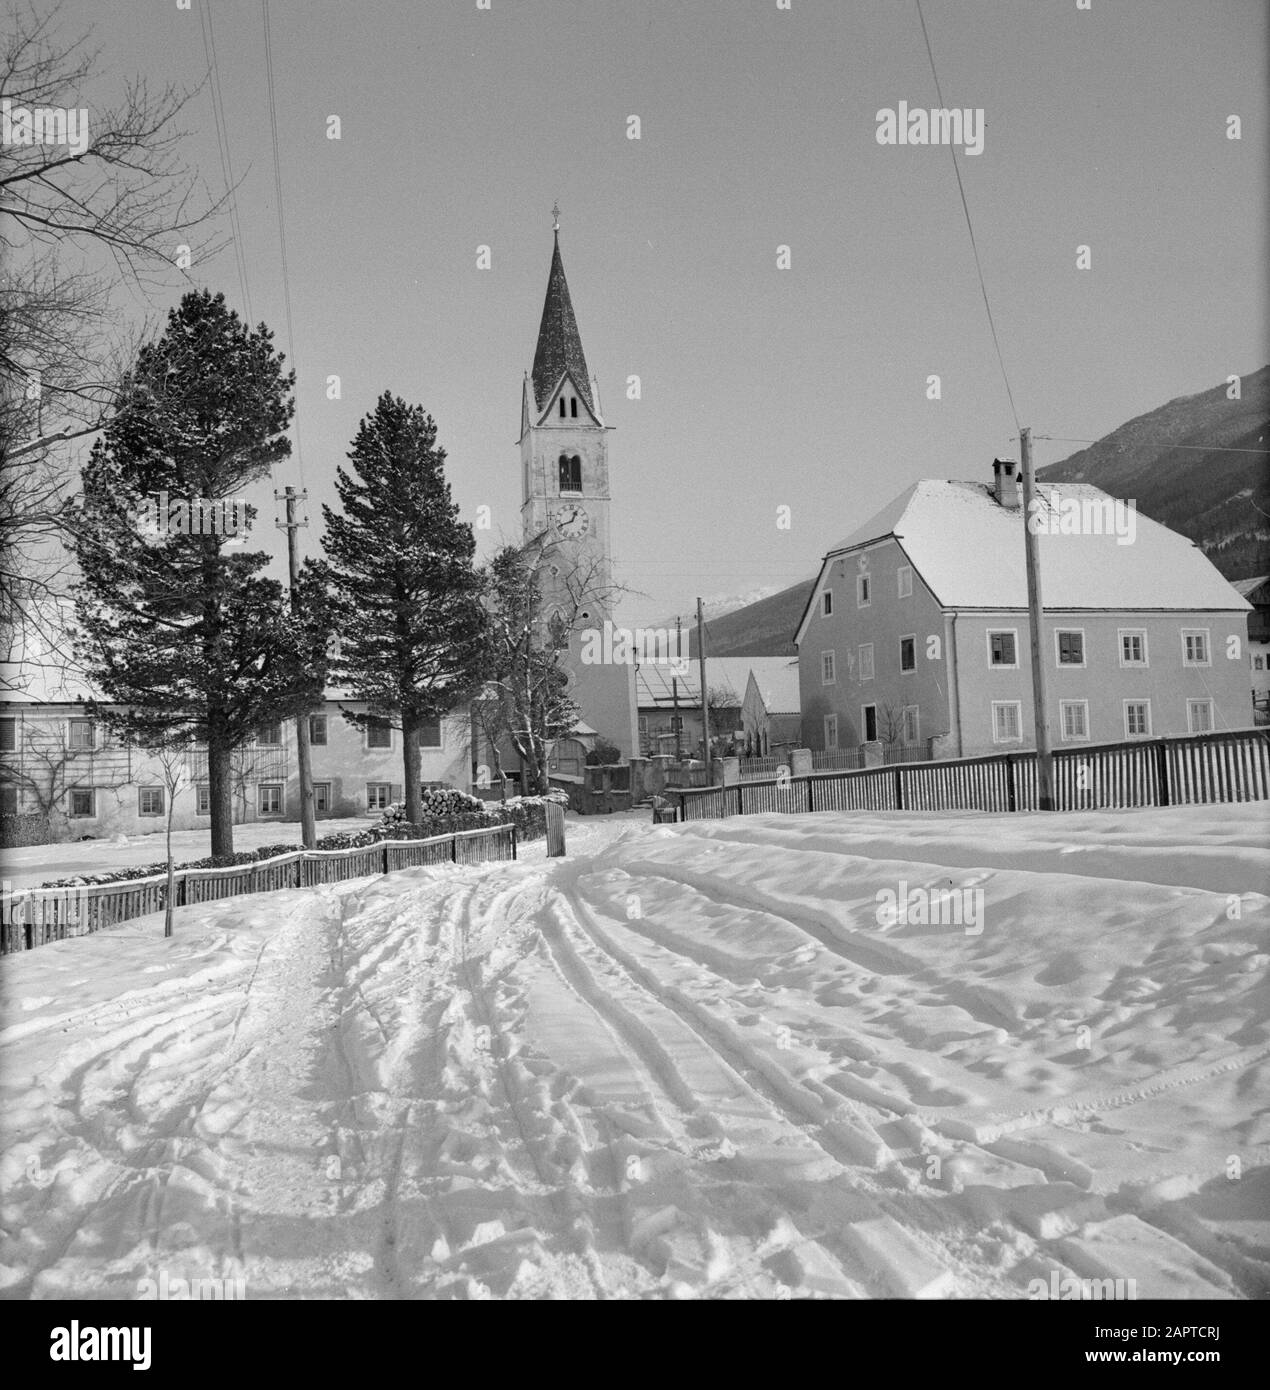 Winter in Tirol  View of Sistrans in the snow Date: January 1960 Location: Austria, Sistrans, Tyrol Keywords: mountains, villages, church buildings, snow, winter, homes Stock Photo